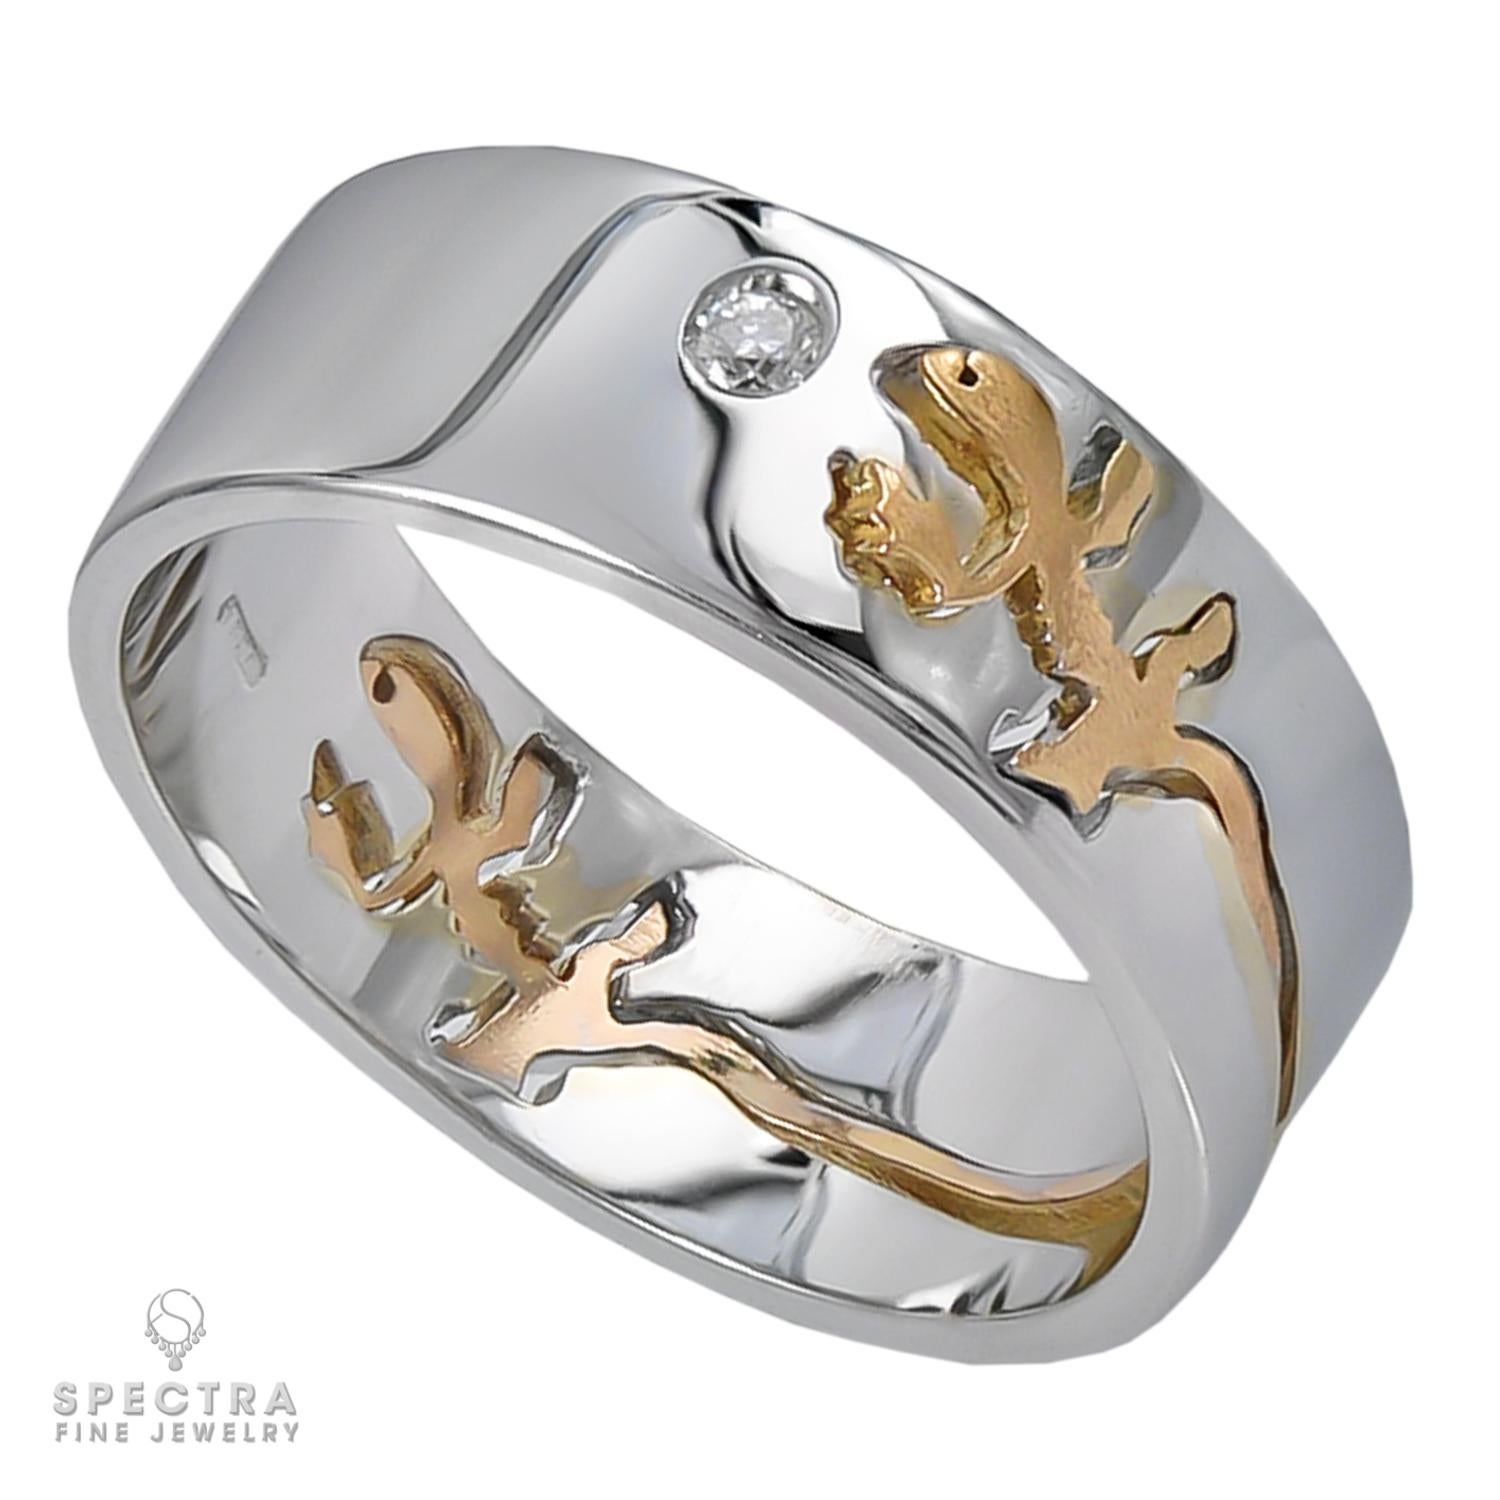 A band ring made by Crivelli in Italy in 18k white gold with a yellow gold Salamander design and two round diamonds.
Weight of diamonds is approximately 0.07 carats.
Retail price: $2,850
Gross weight: 8.4 grams
Size: 8.5.